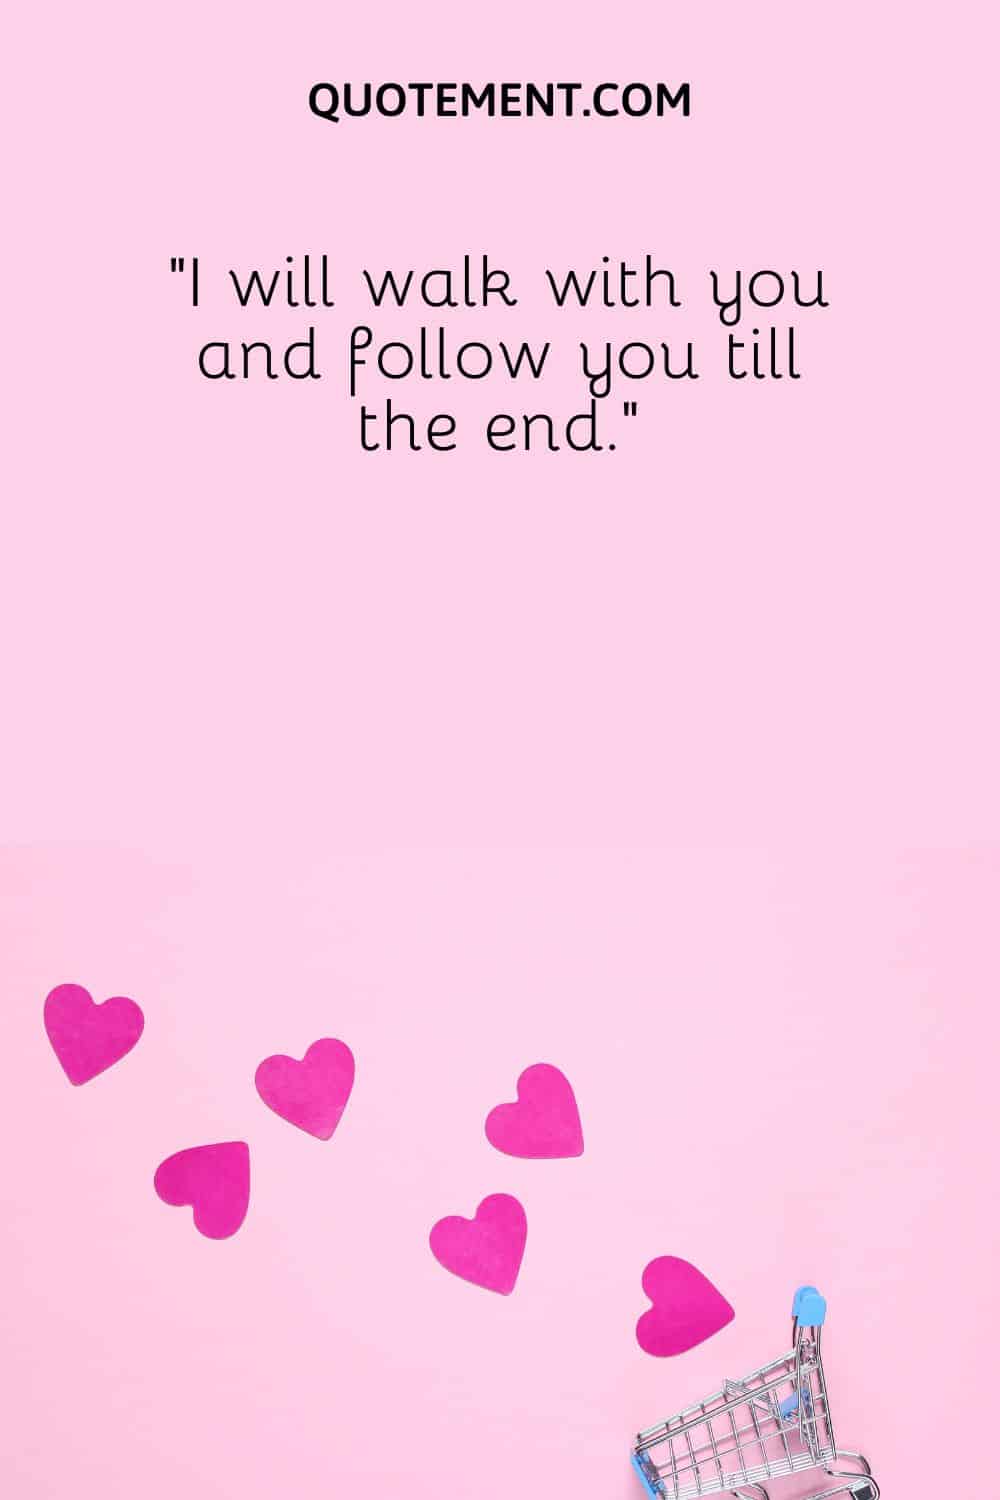 “I will walk with you and follow you till the end.”